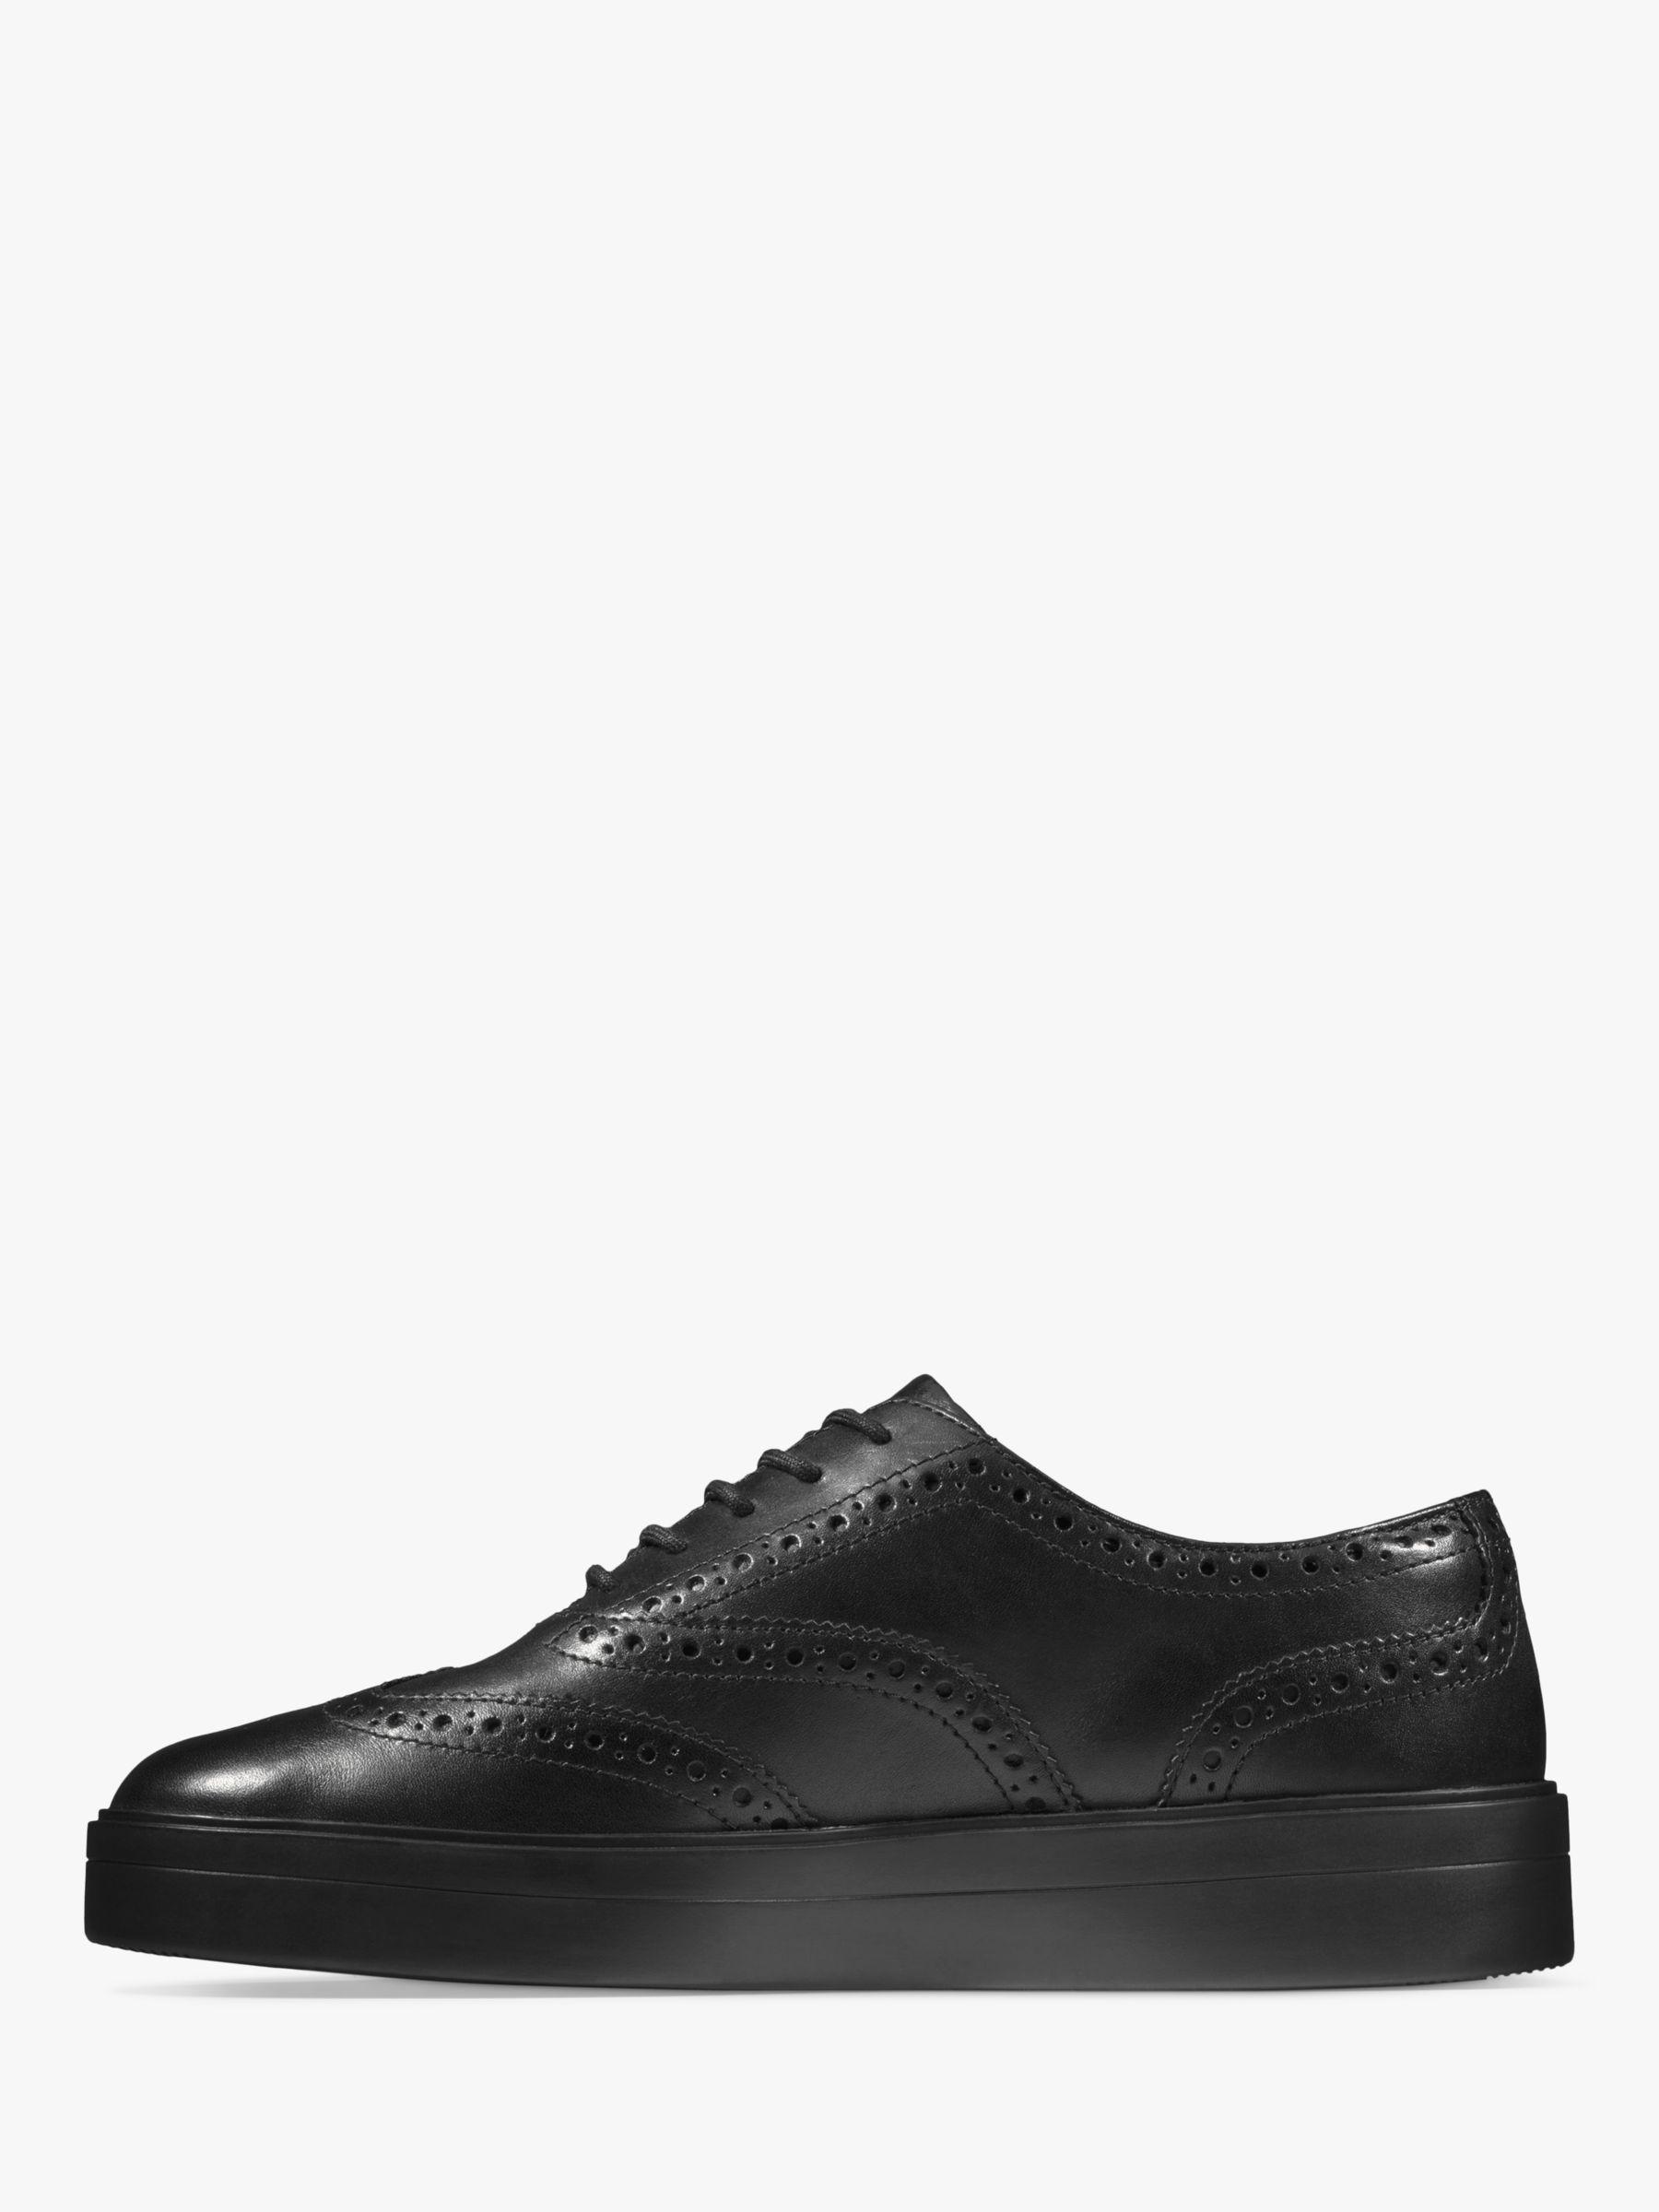 clarks black and white brogues